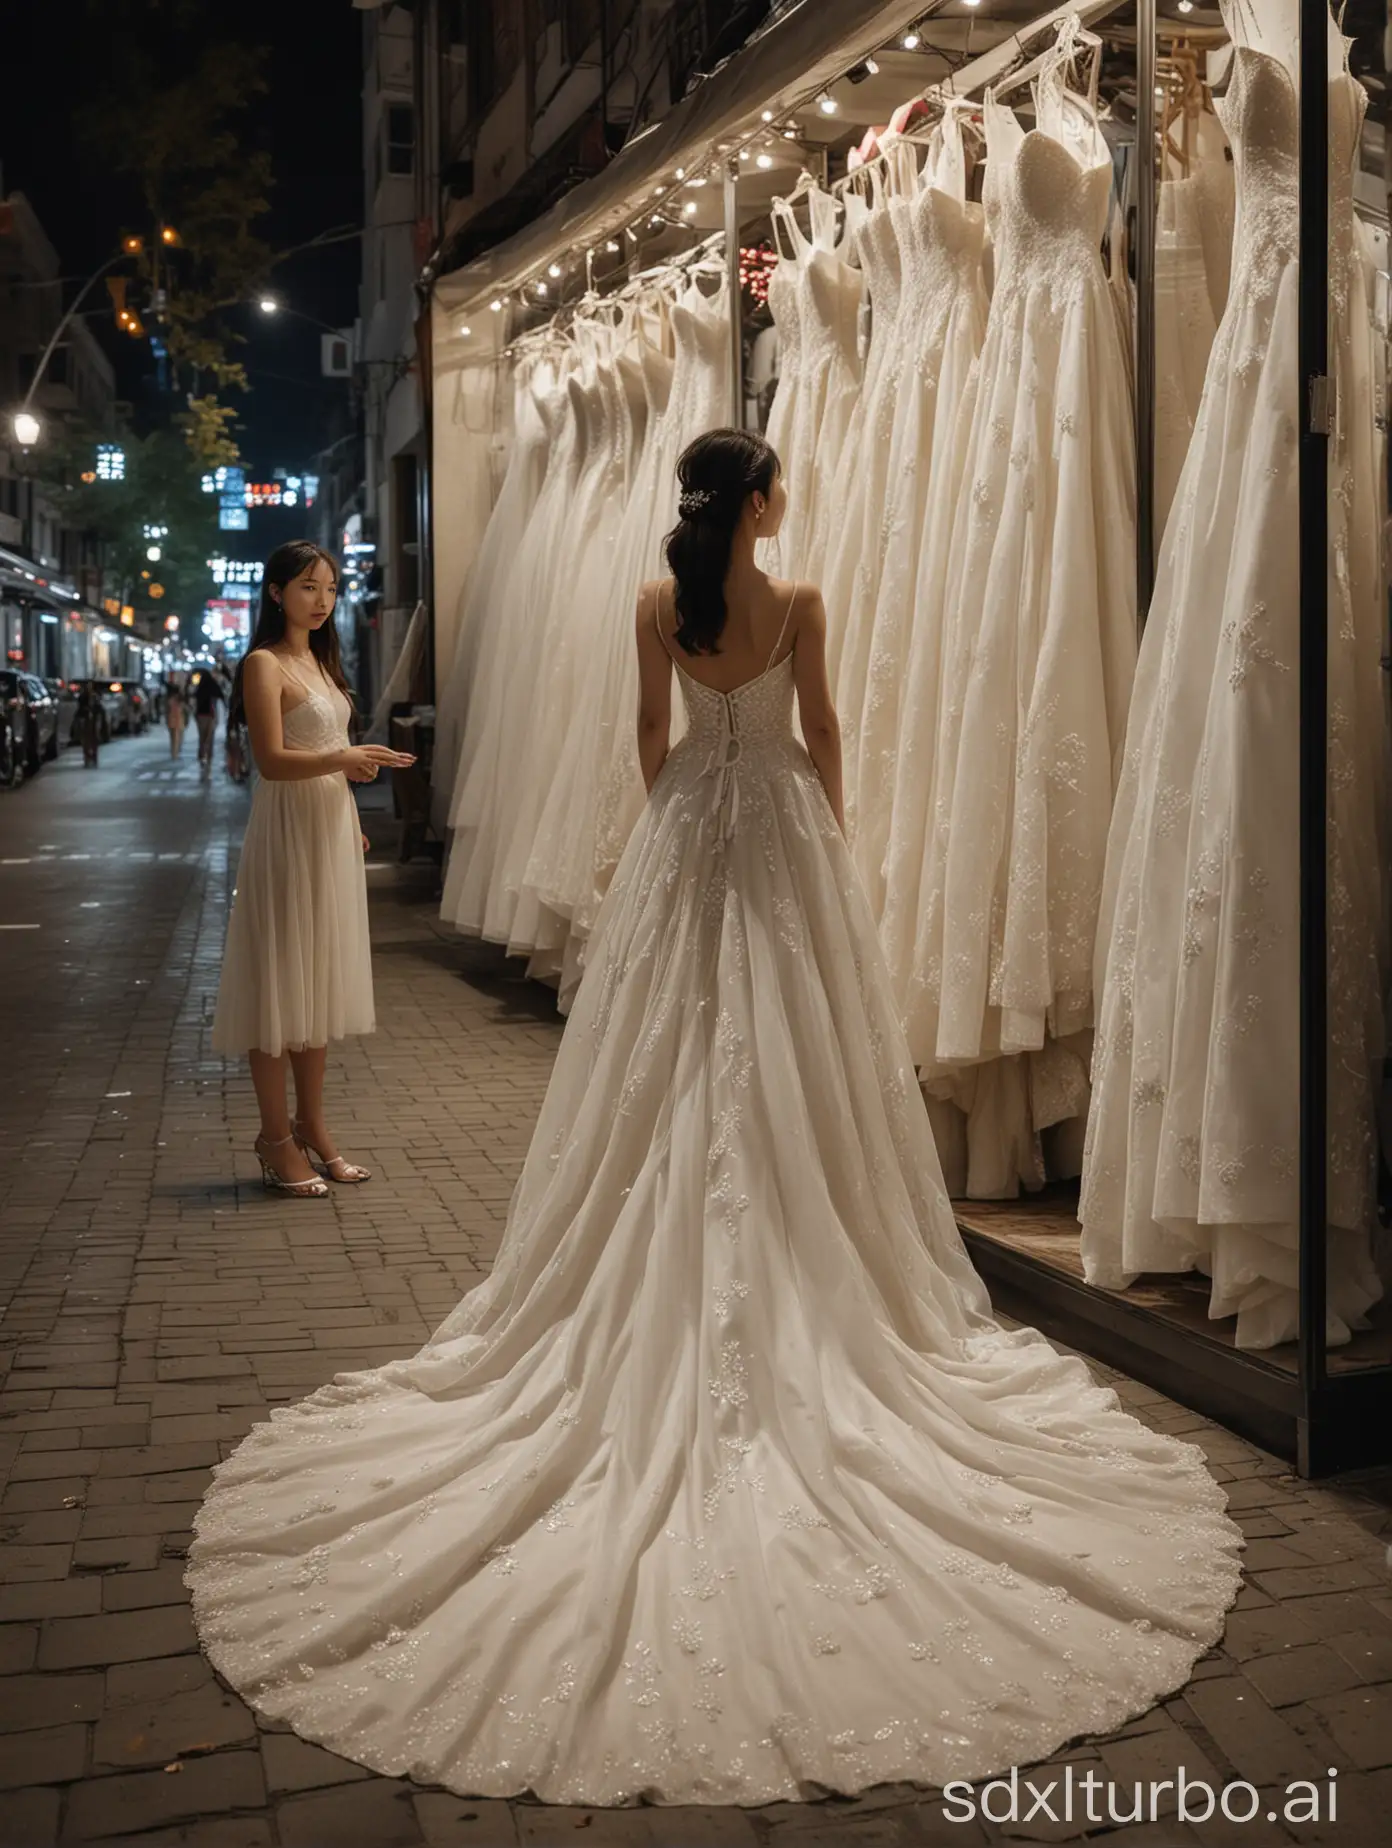 At night, a Chinese girl is looking at the back of a wedding dress in a bridal shop on the city street, with the girl positioned in the middle of the picture